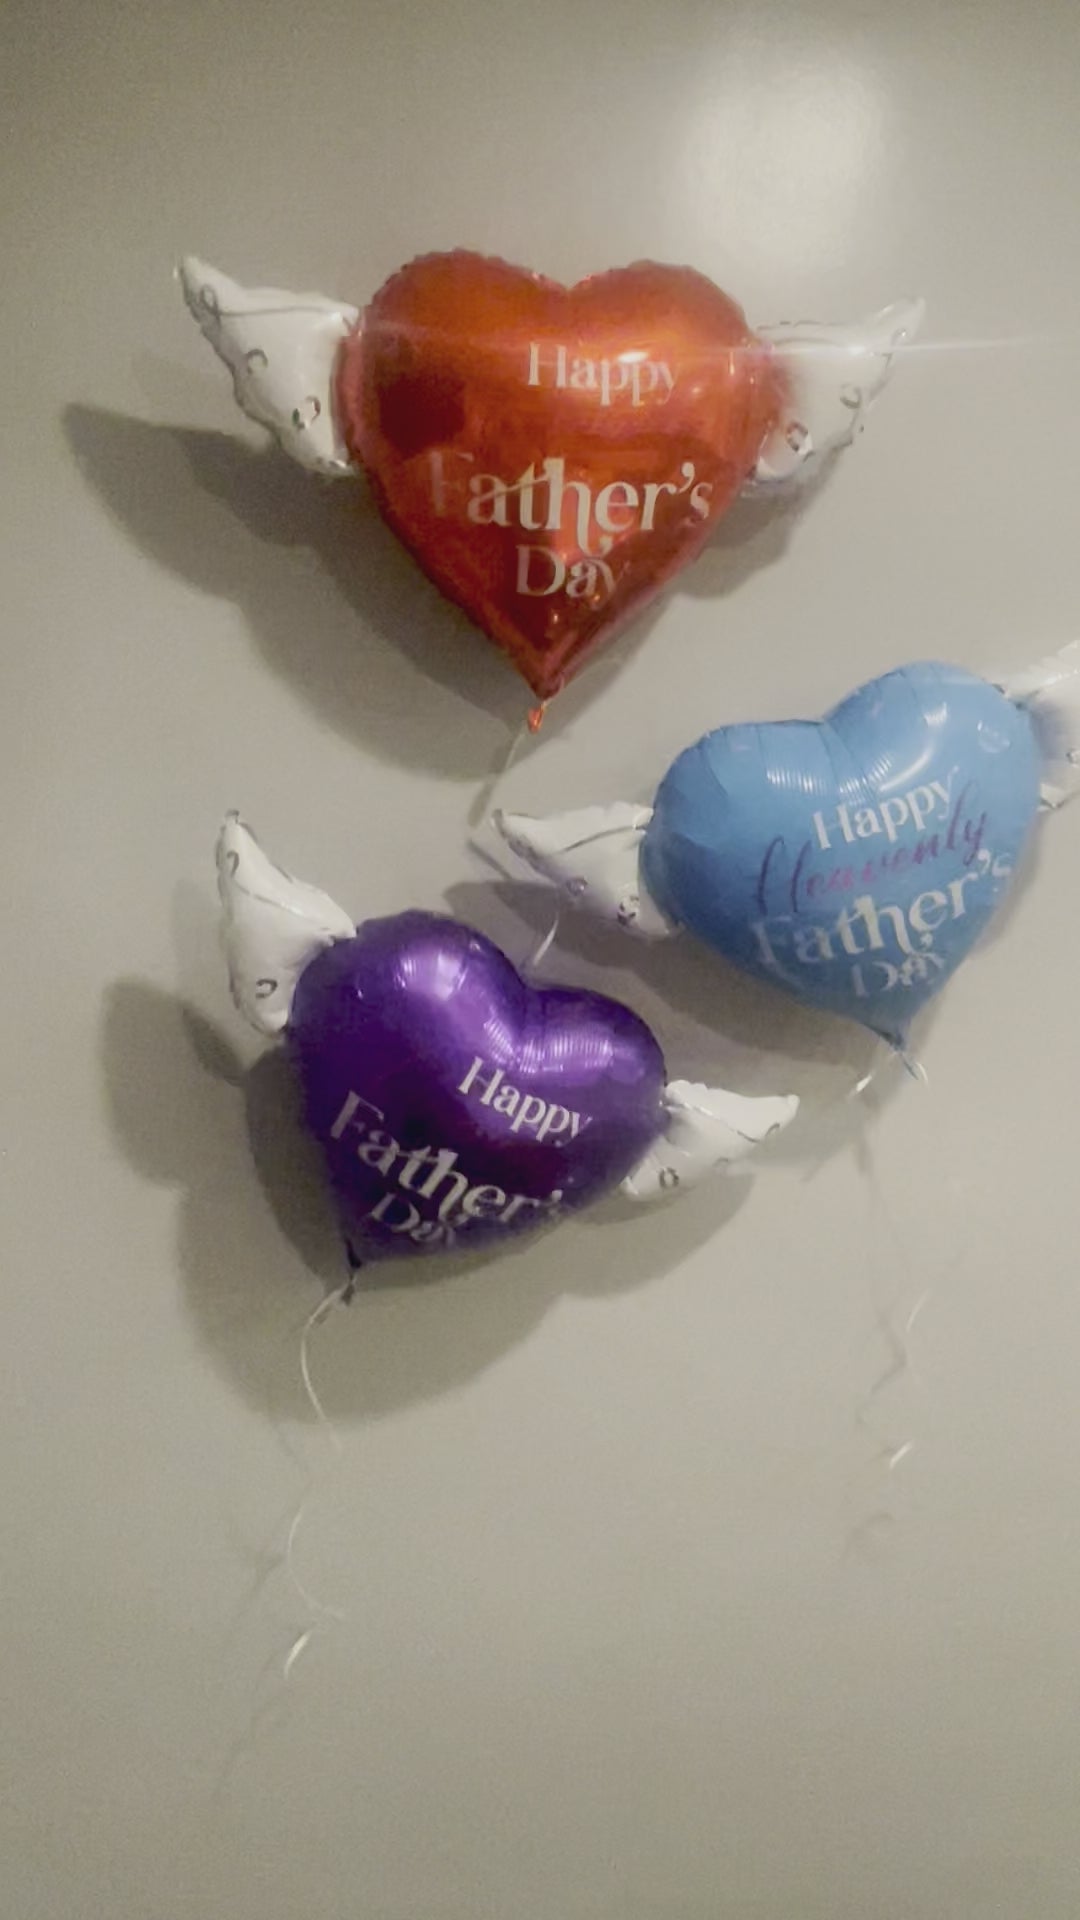 (Video) Happy Heavenly Father's Day Balloons Heart Shaped with angel wings (Blue, Red & Purple)